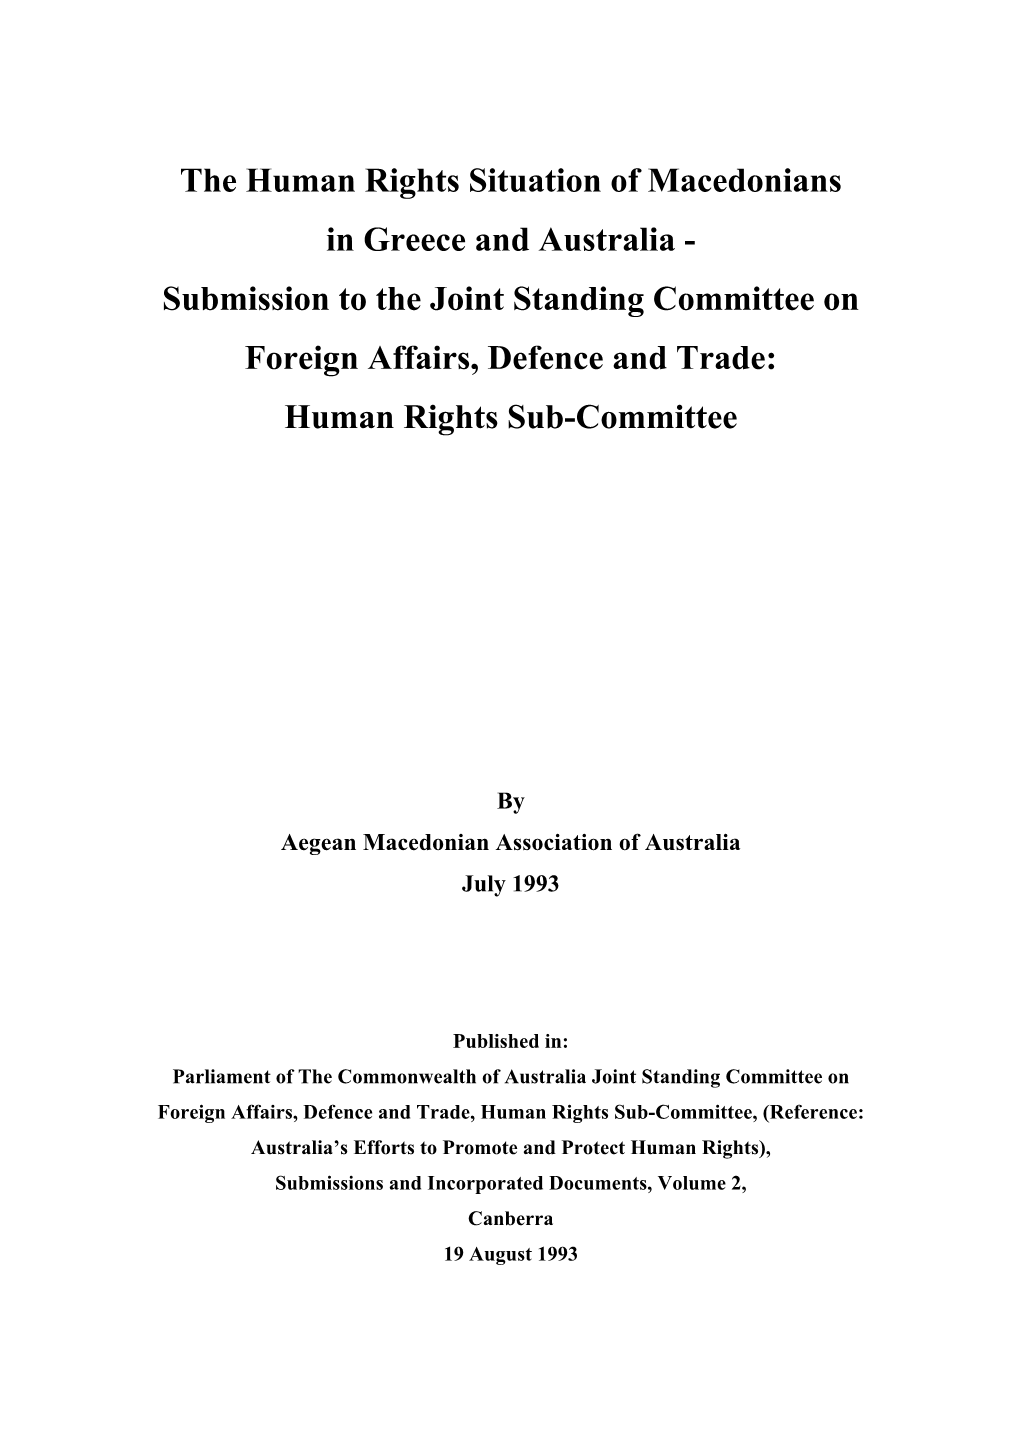 The Human Rights Situation of Macedonians in Greece and Australia